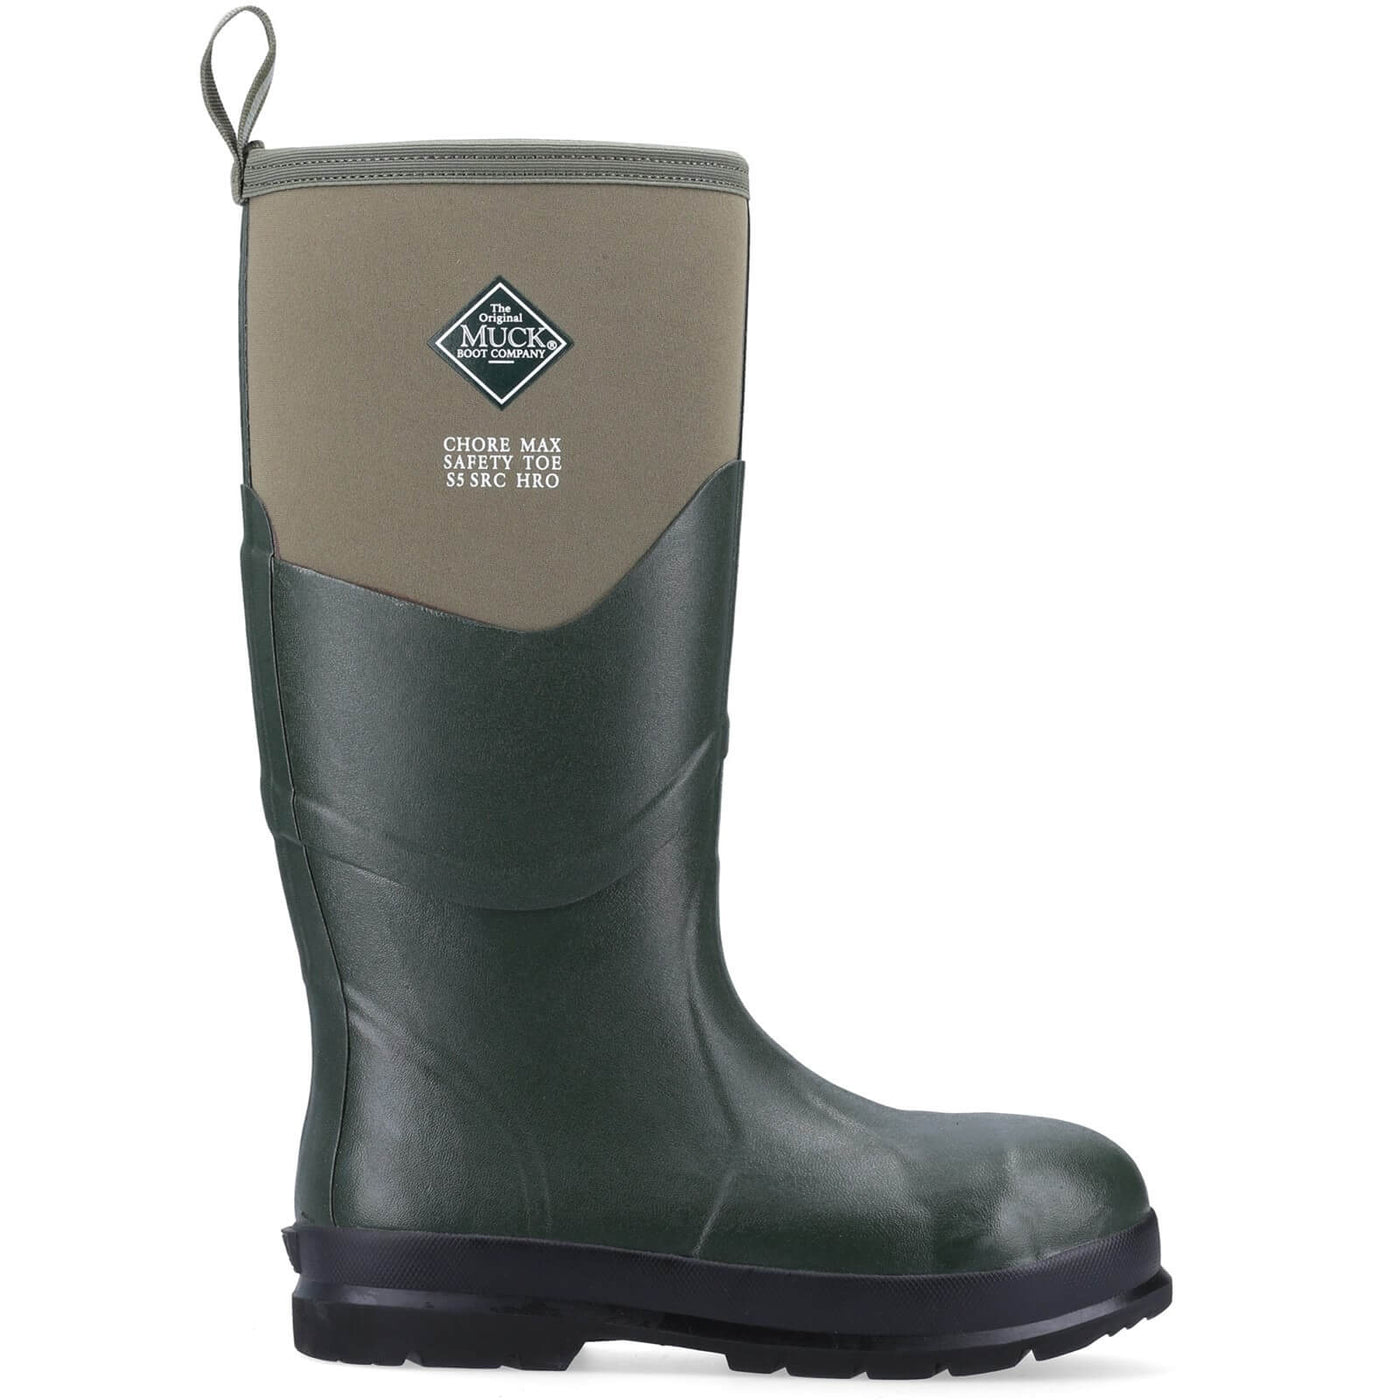 Muck Boots Chore Max S5 Safety Wellies Moss 5#colour_moss-army-green